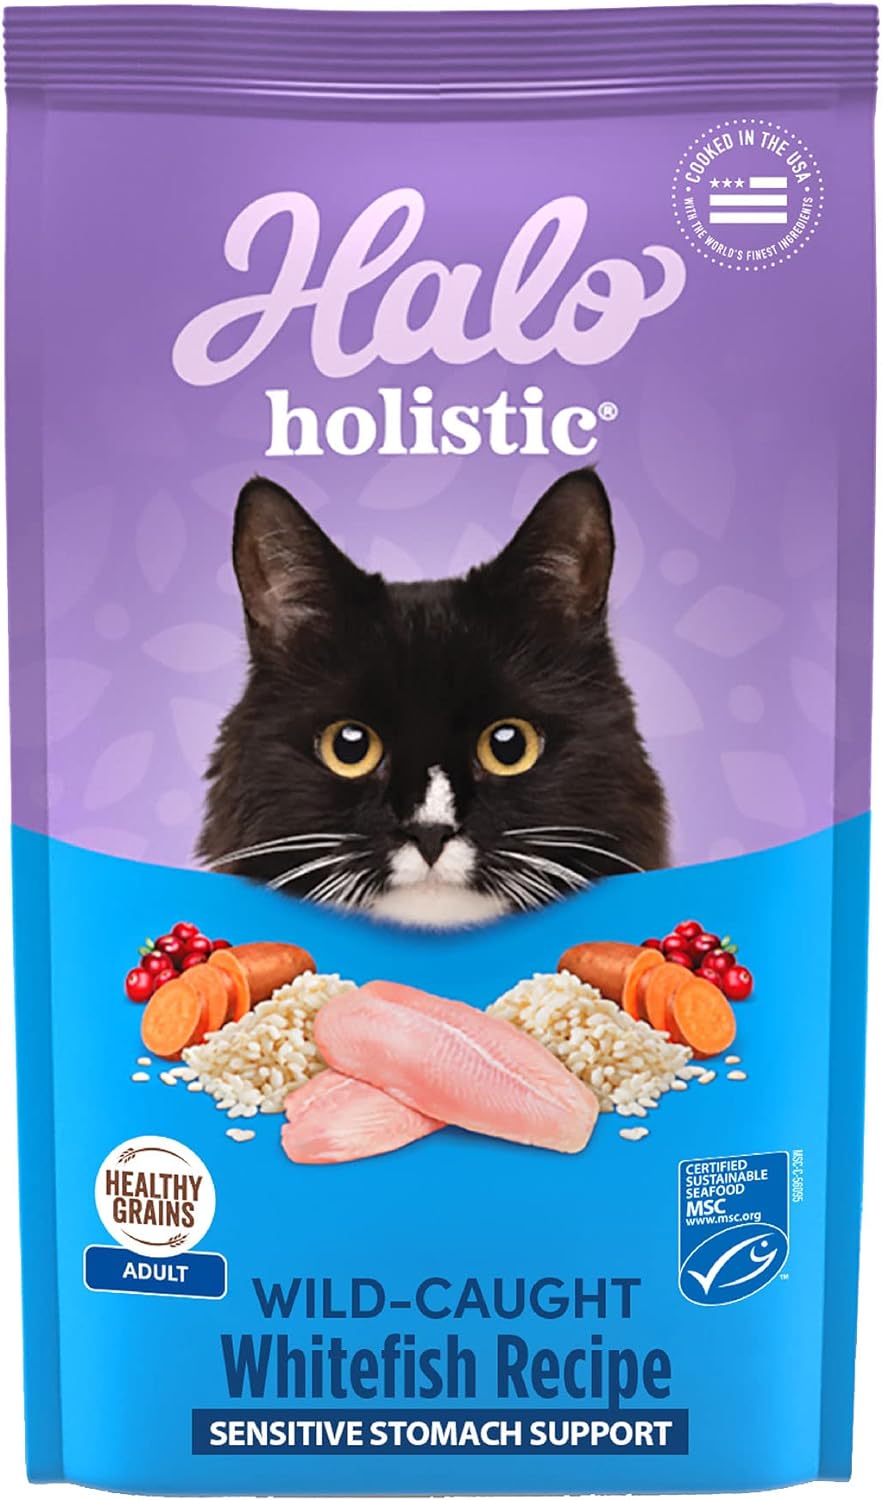 Halo Holistic Wild-Caught Whitefish Recipe Sensitive Stomach Support Adult Dry Cat Food